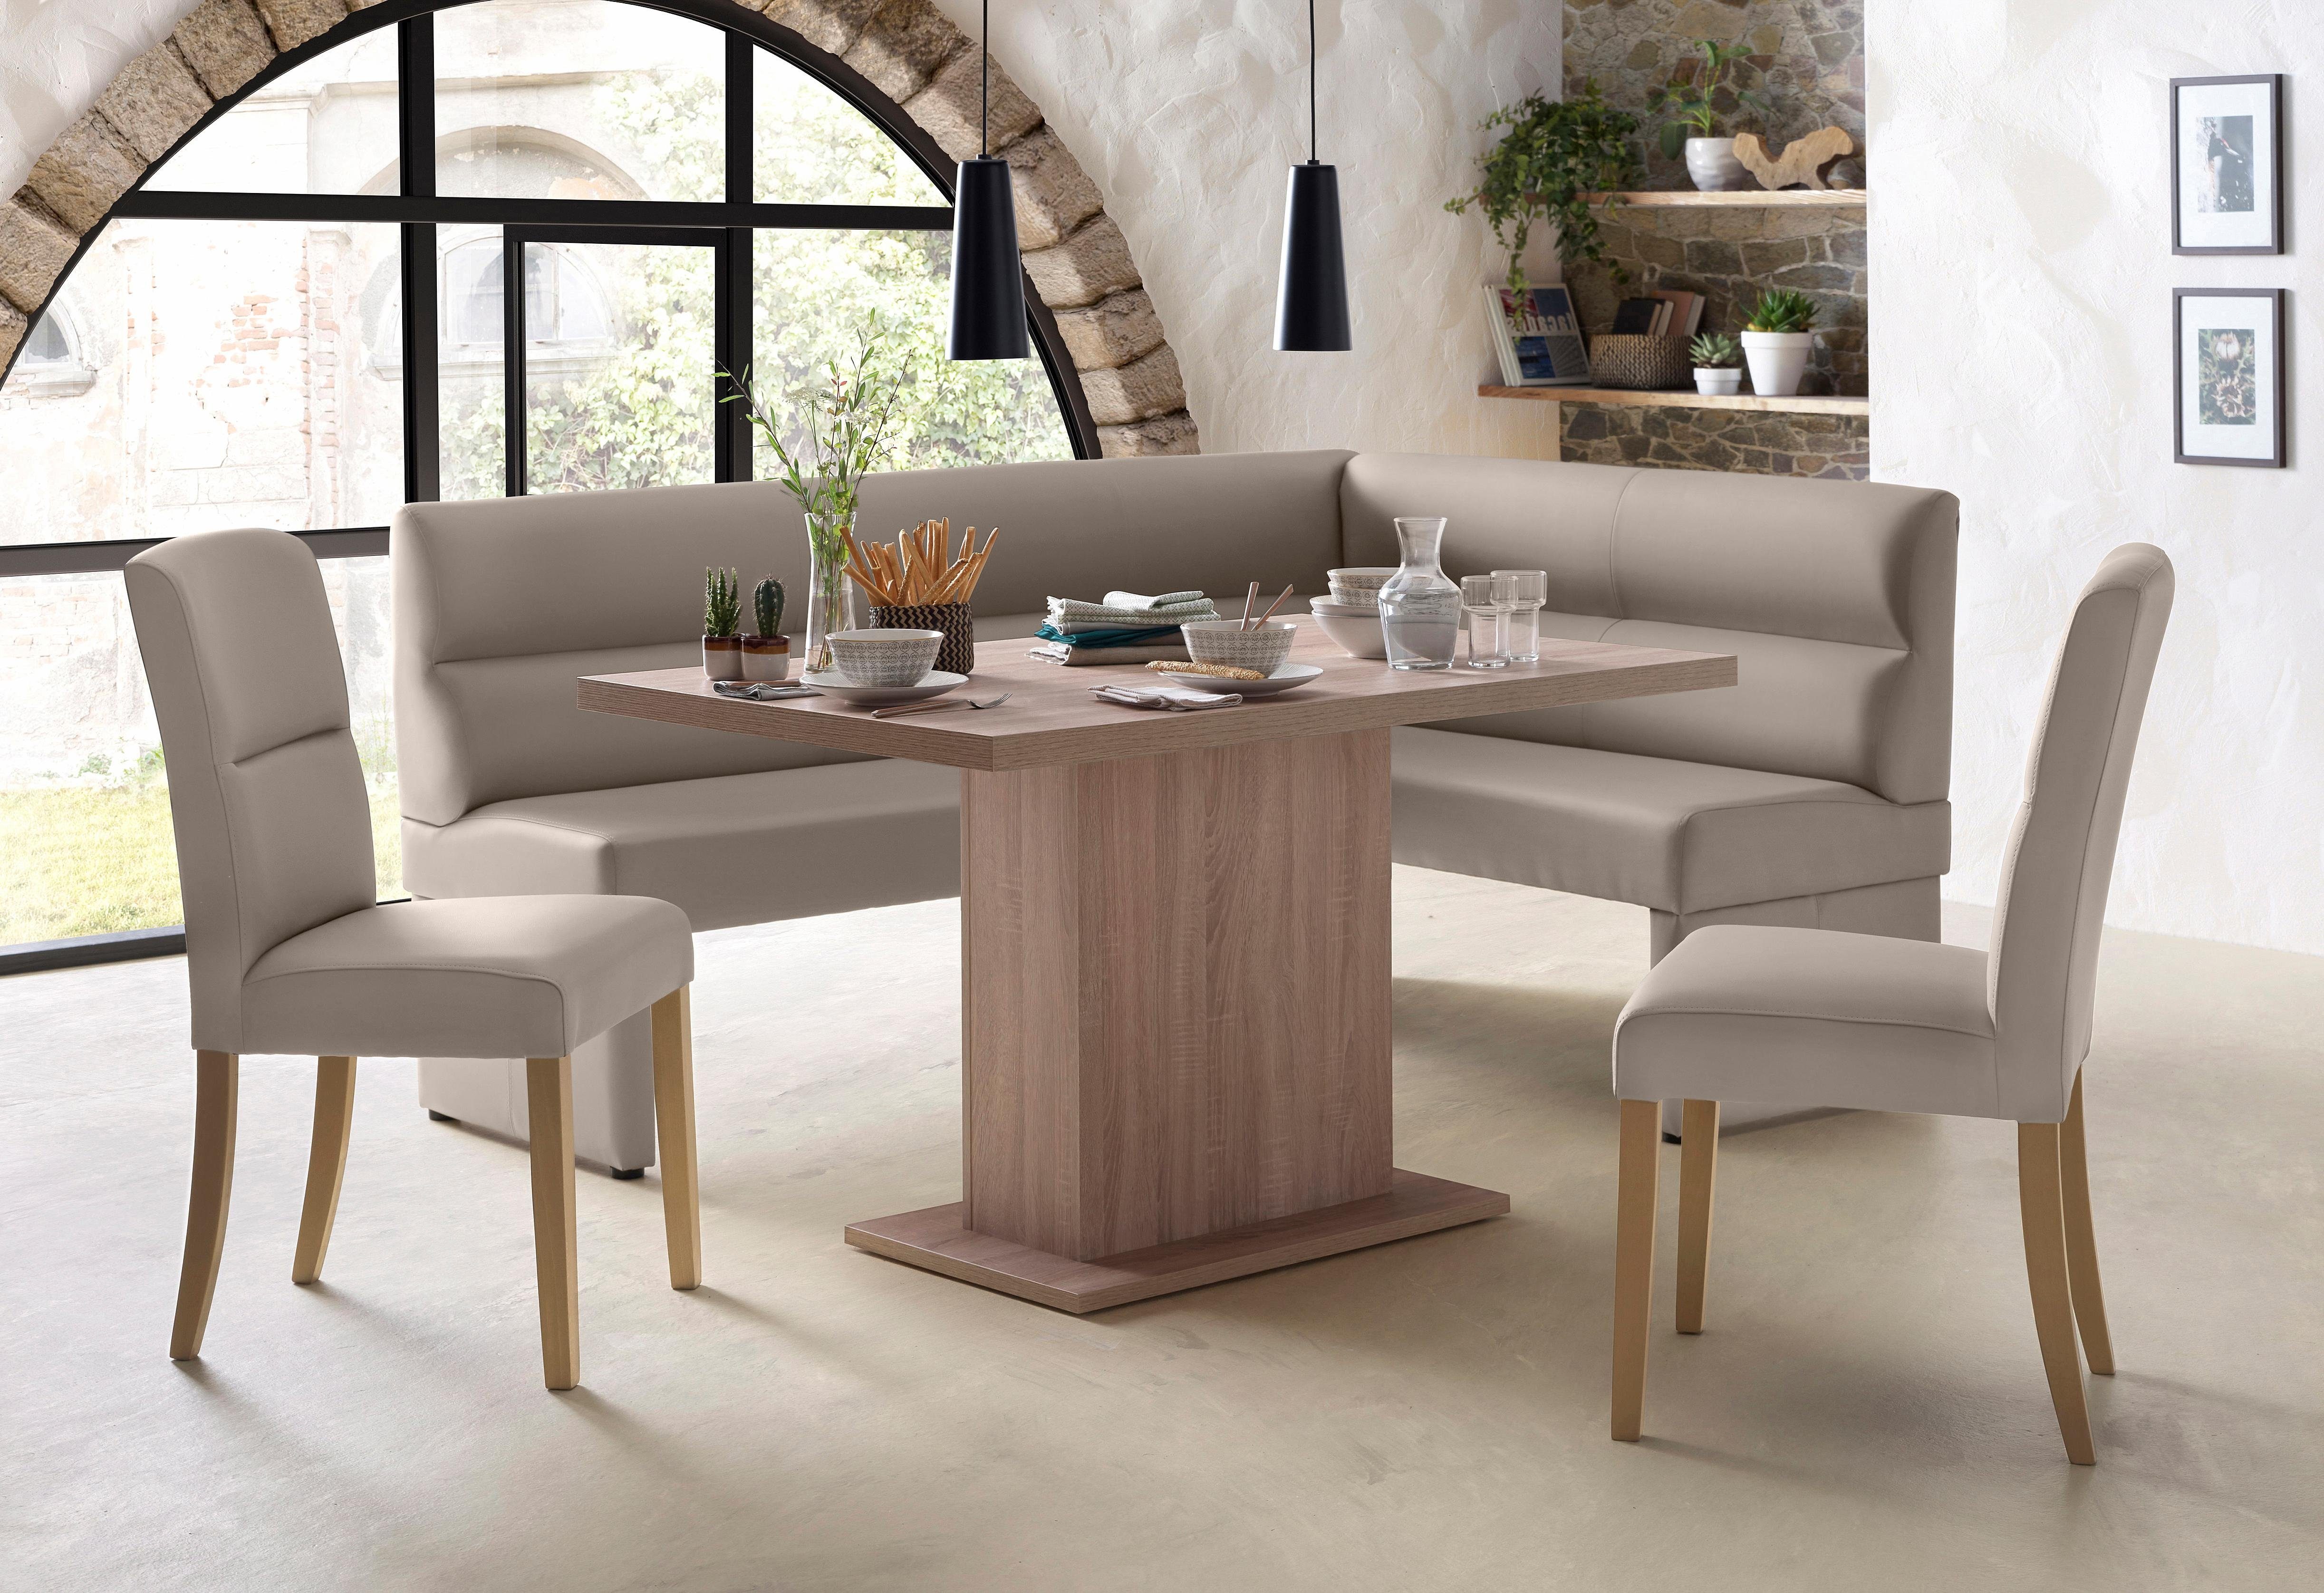 Premium collection by Home affaire Eethoek Cool + cross